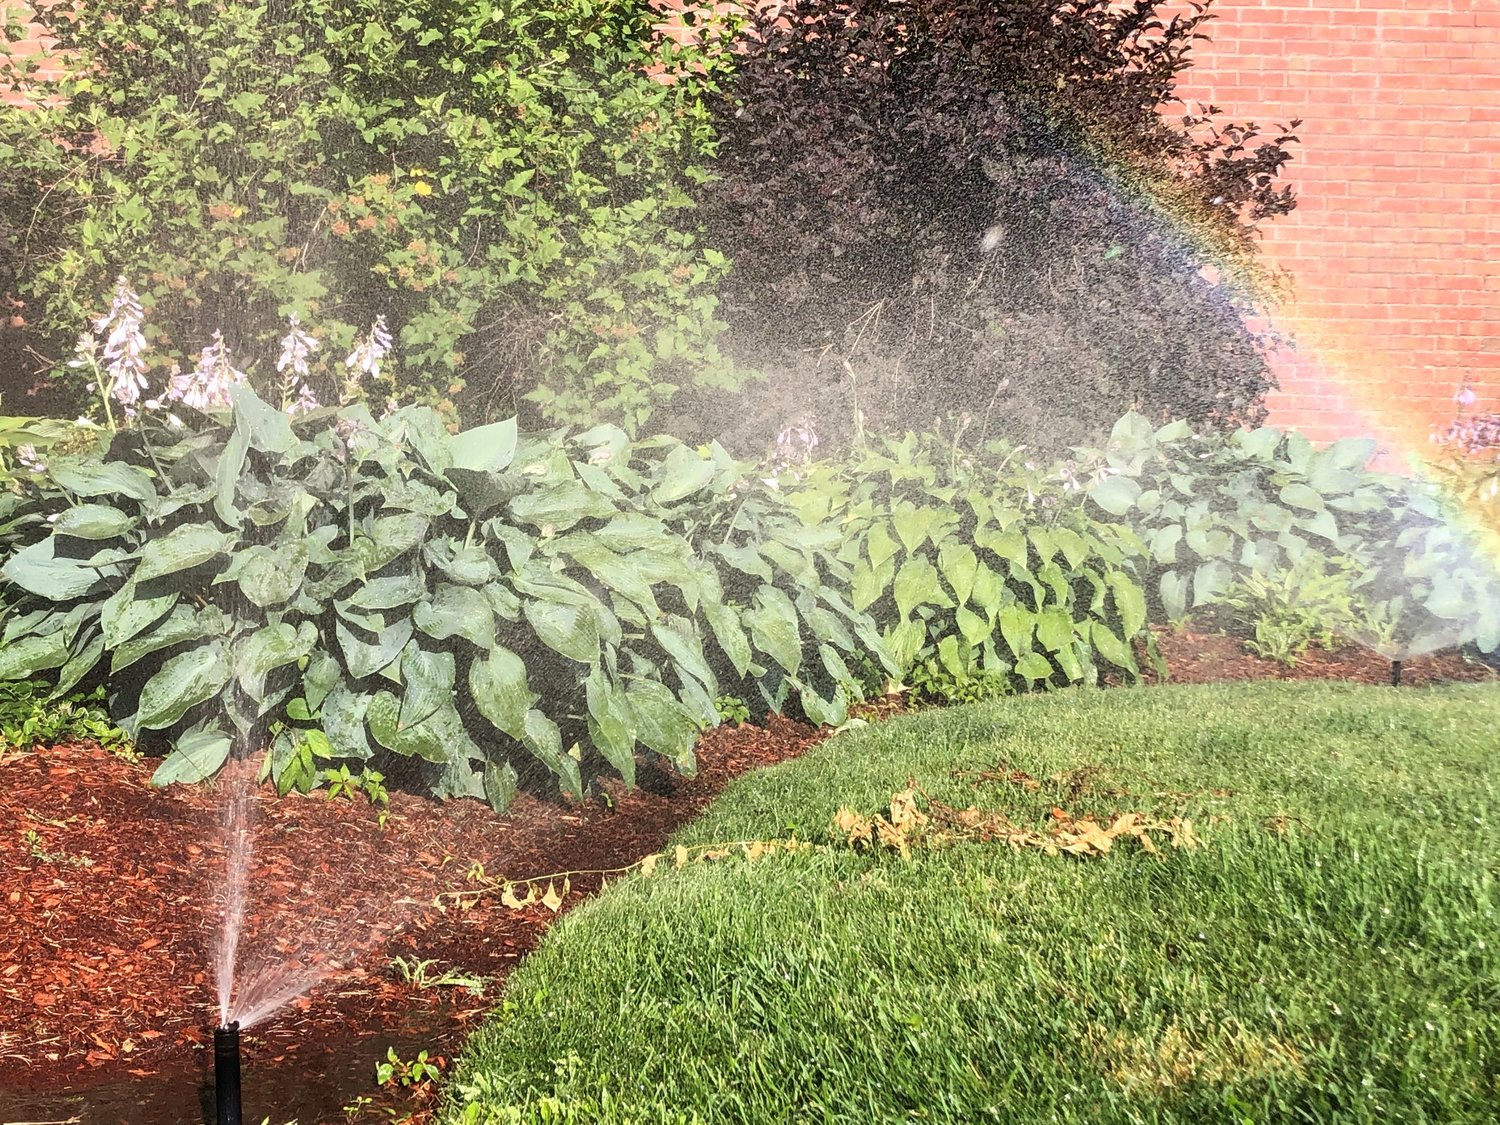 Lawn water usage is at an all time high, according to Liberty New York Water.